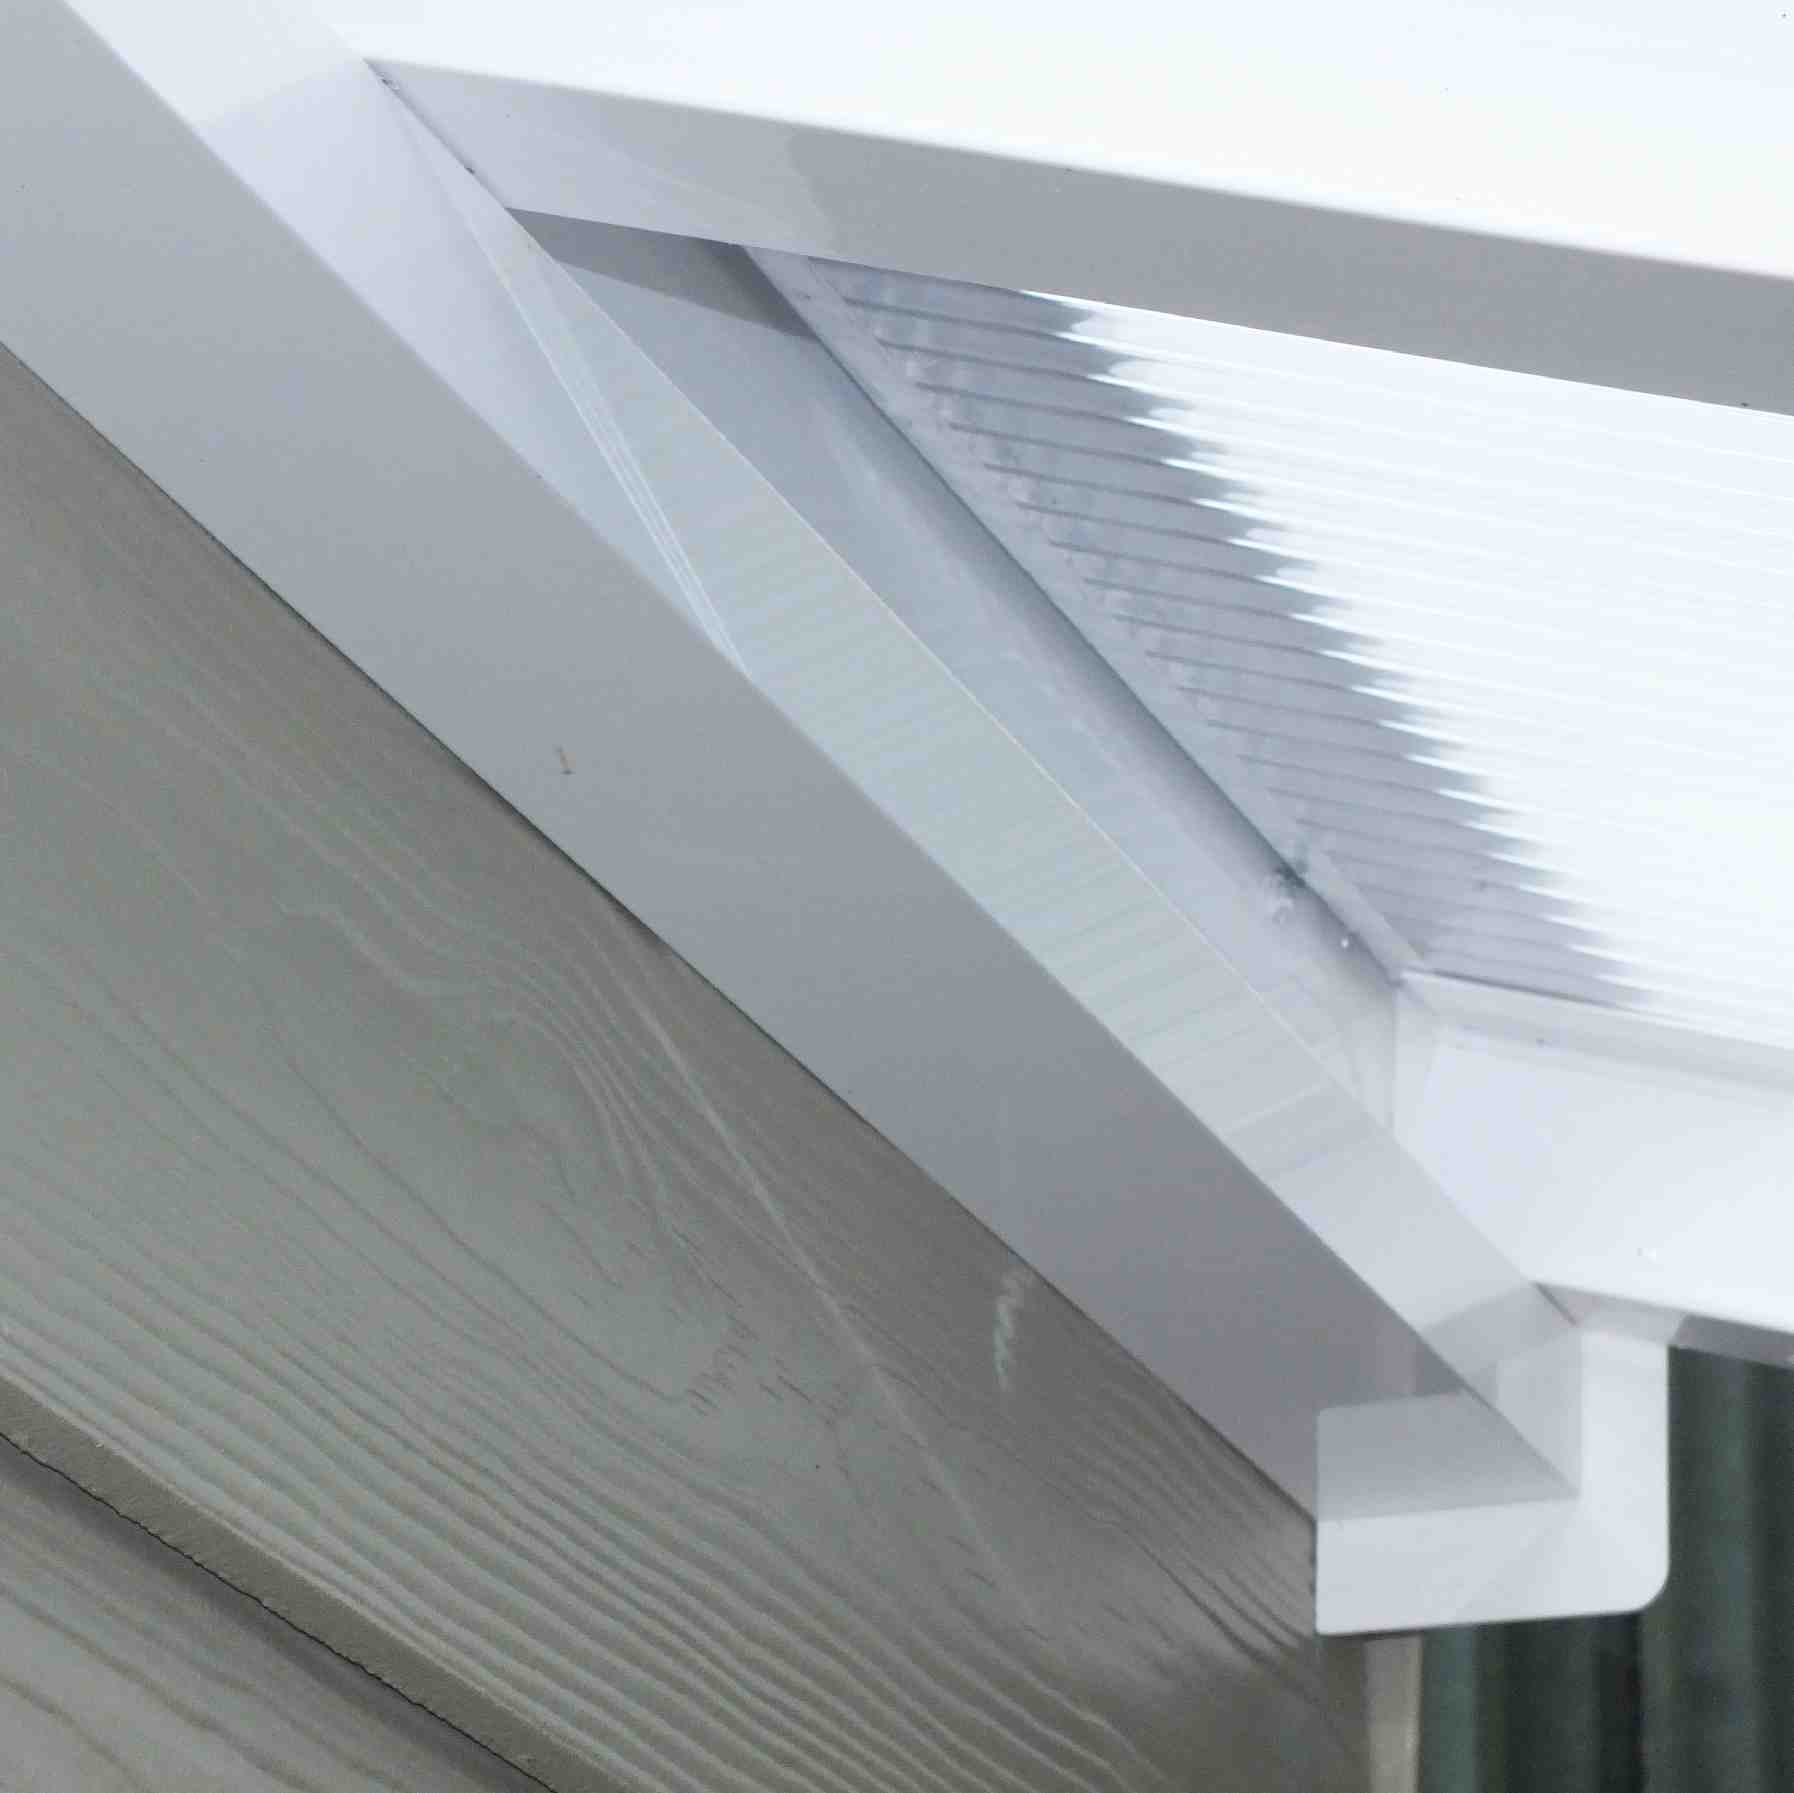 Great deals on Omega Verandah White with 6mm Glass Clear Plate Polycarbonate Glazing - 7.7m (W) x 2.0m (P), (4) Supporting Posts